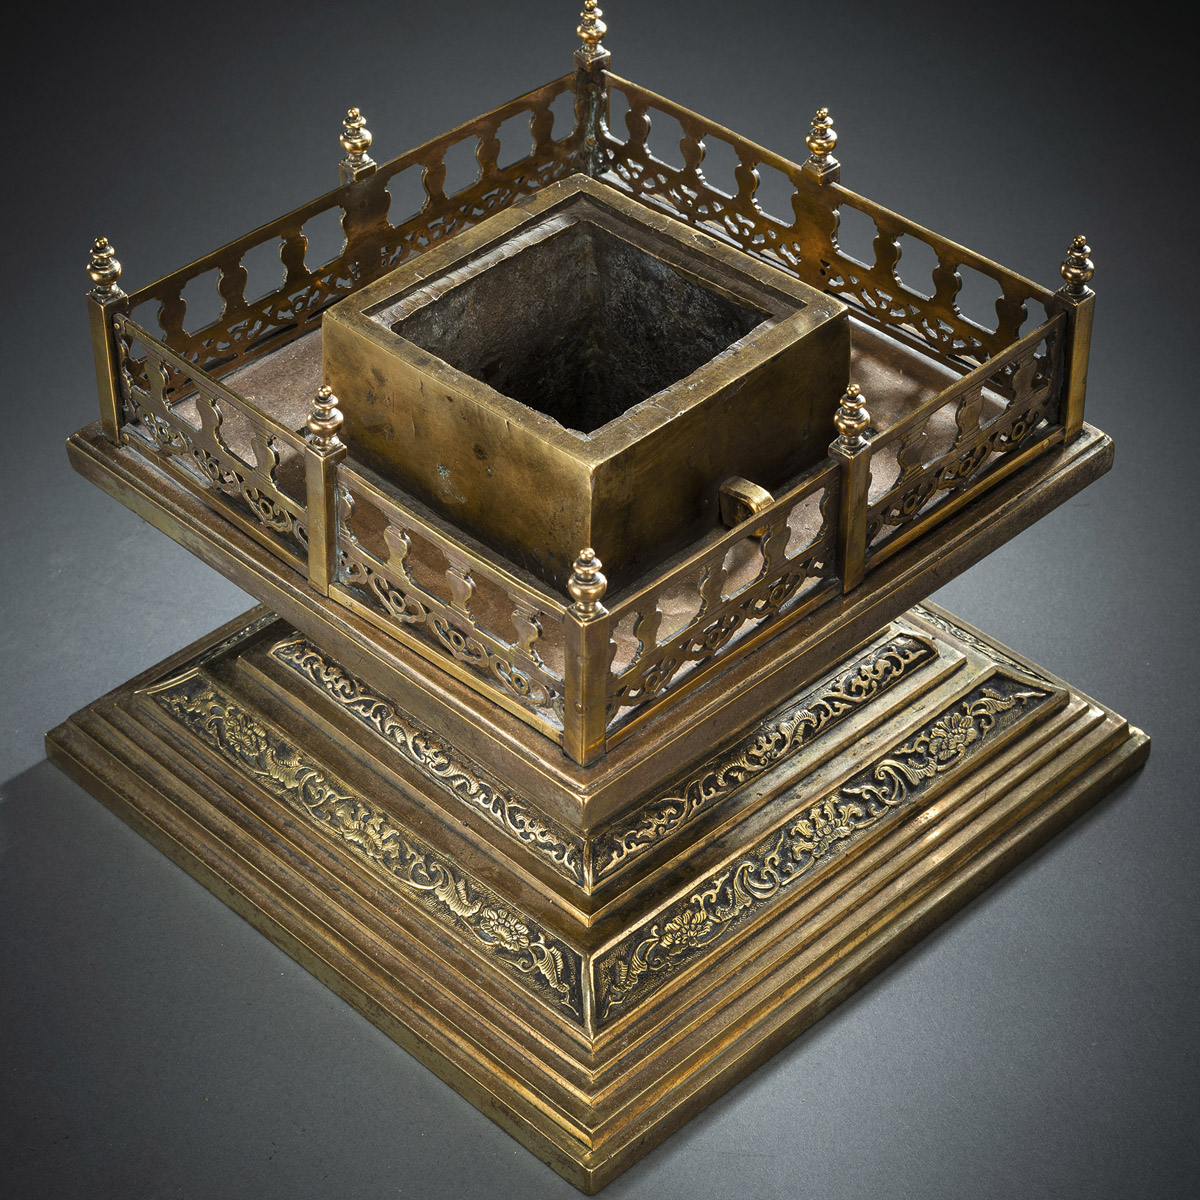 AN EXTREMELAY RARE IMPERIAL PAVILION SHAPED INCENSE BURNER 'XIANTONG' - Image 10 of 11